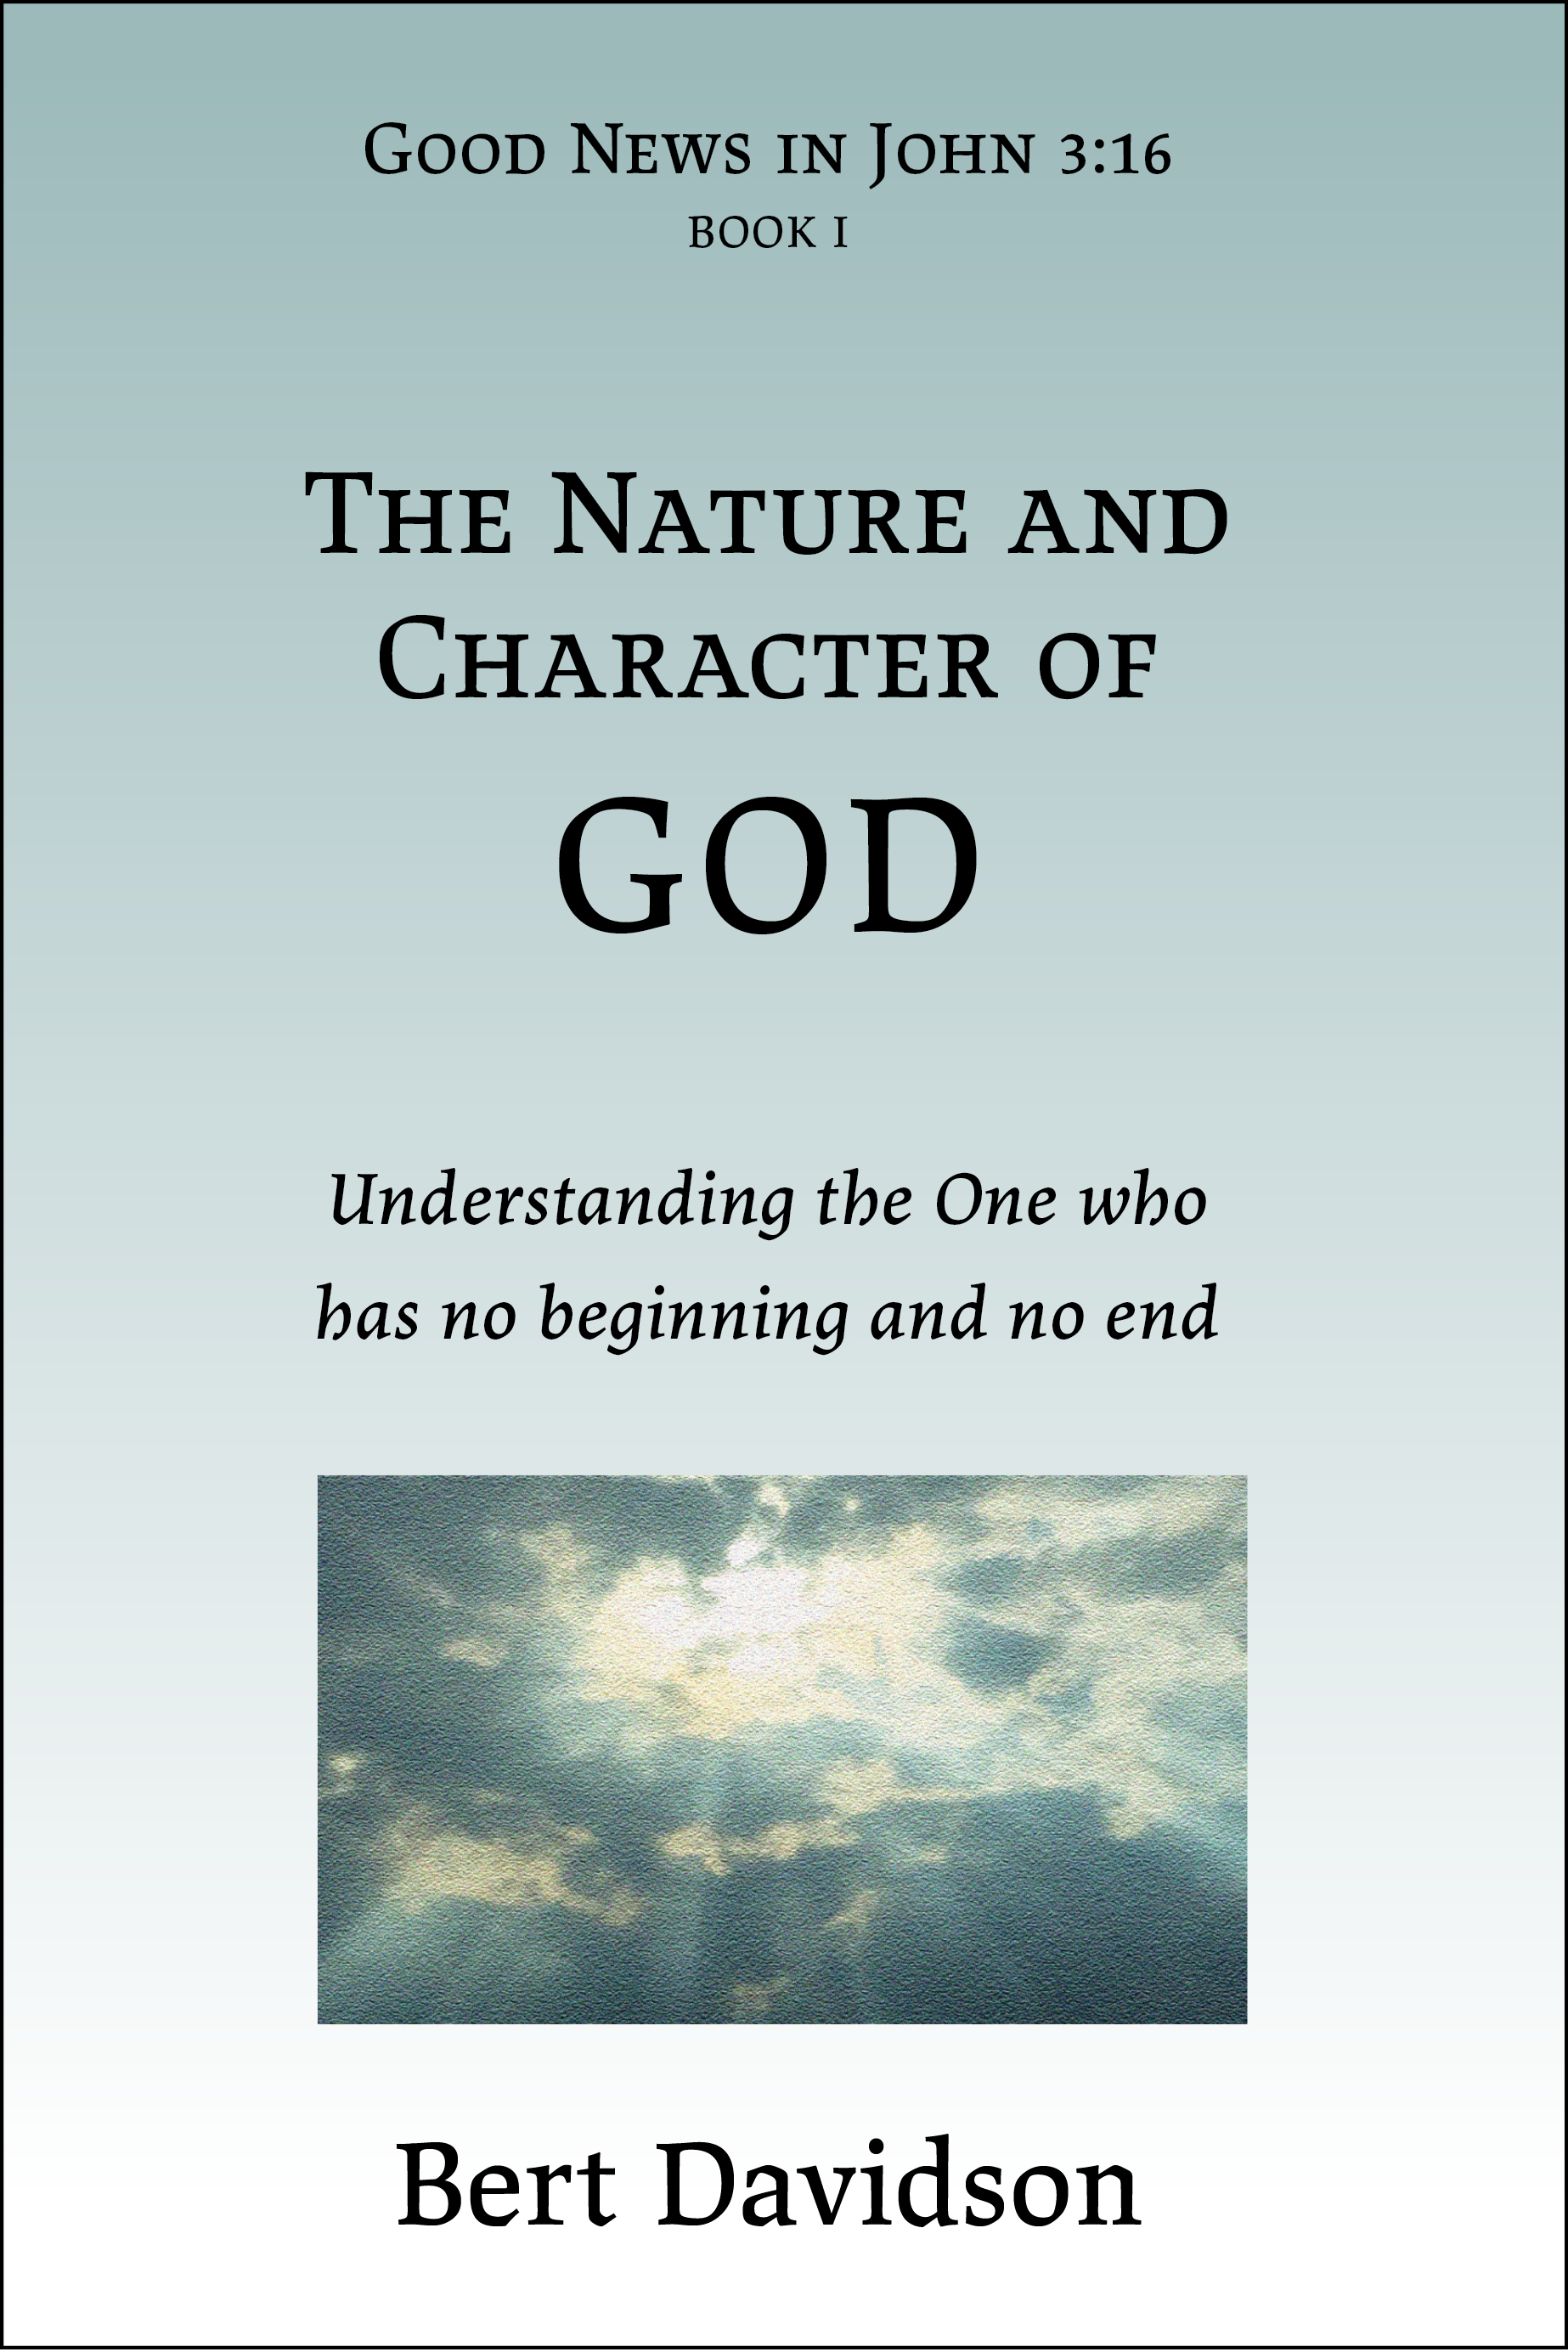 The Nature and Character of God book cover